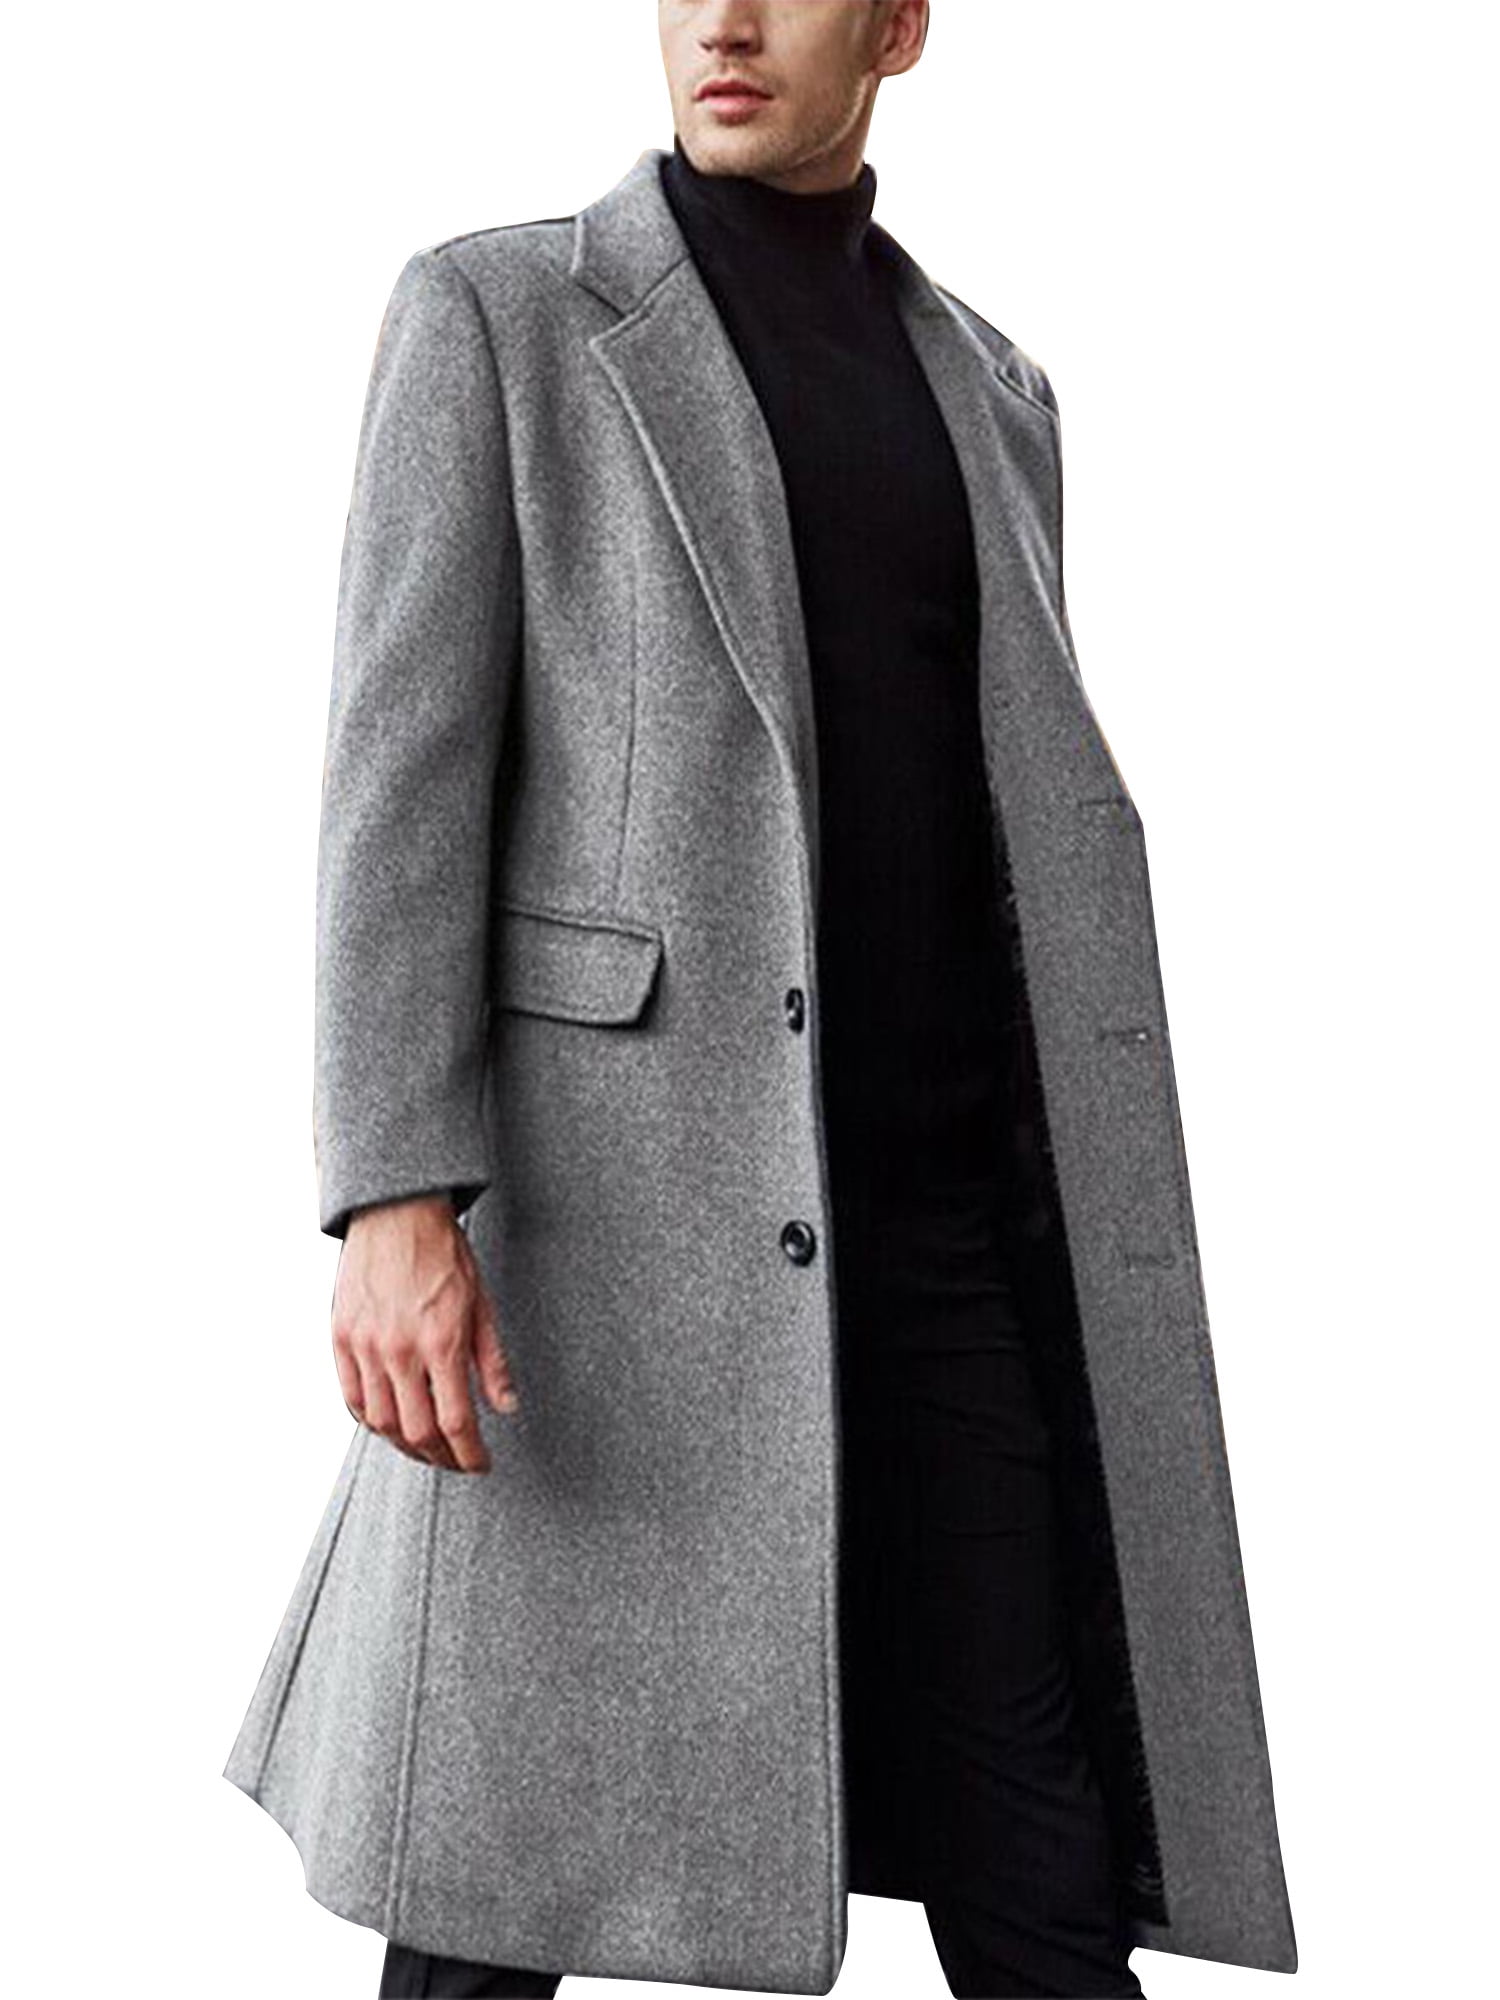 Mens Winter Trench Coat Double Breasted Warm Peacoat Long Jacket Casual Overcoat